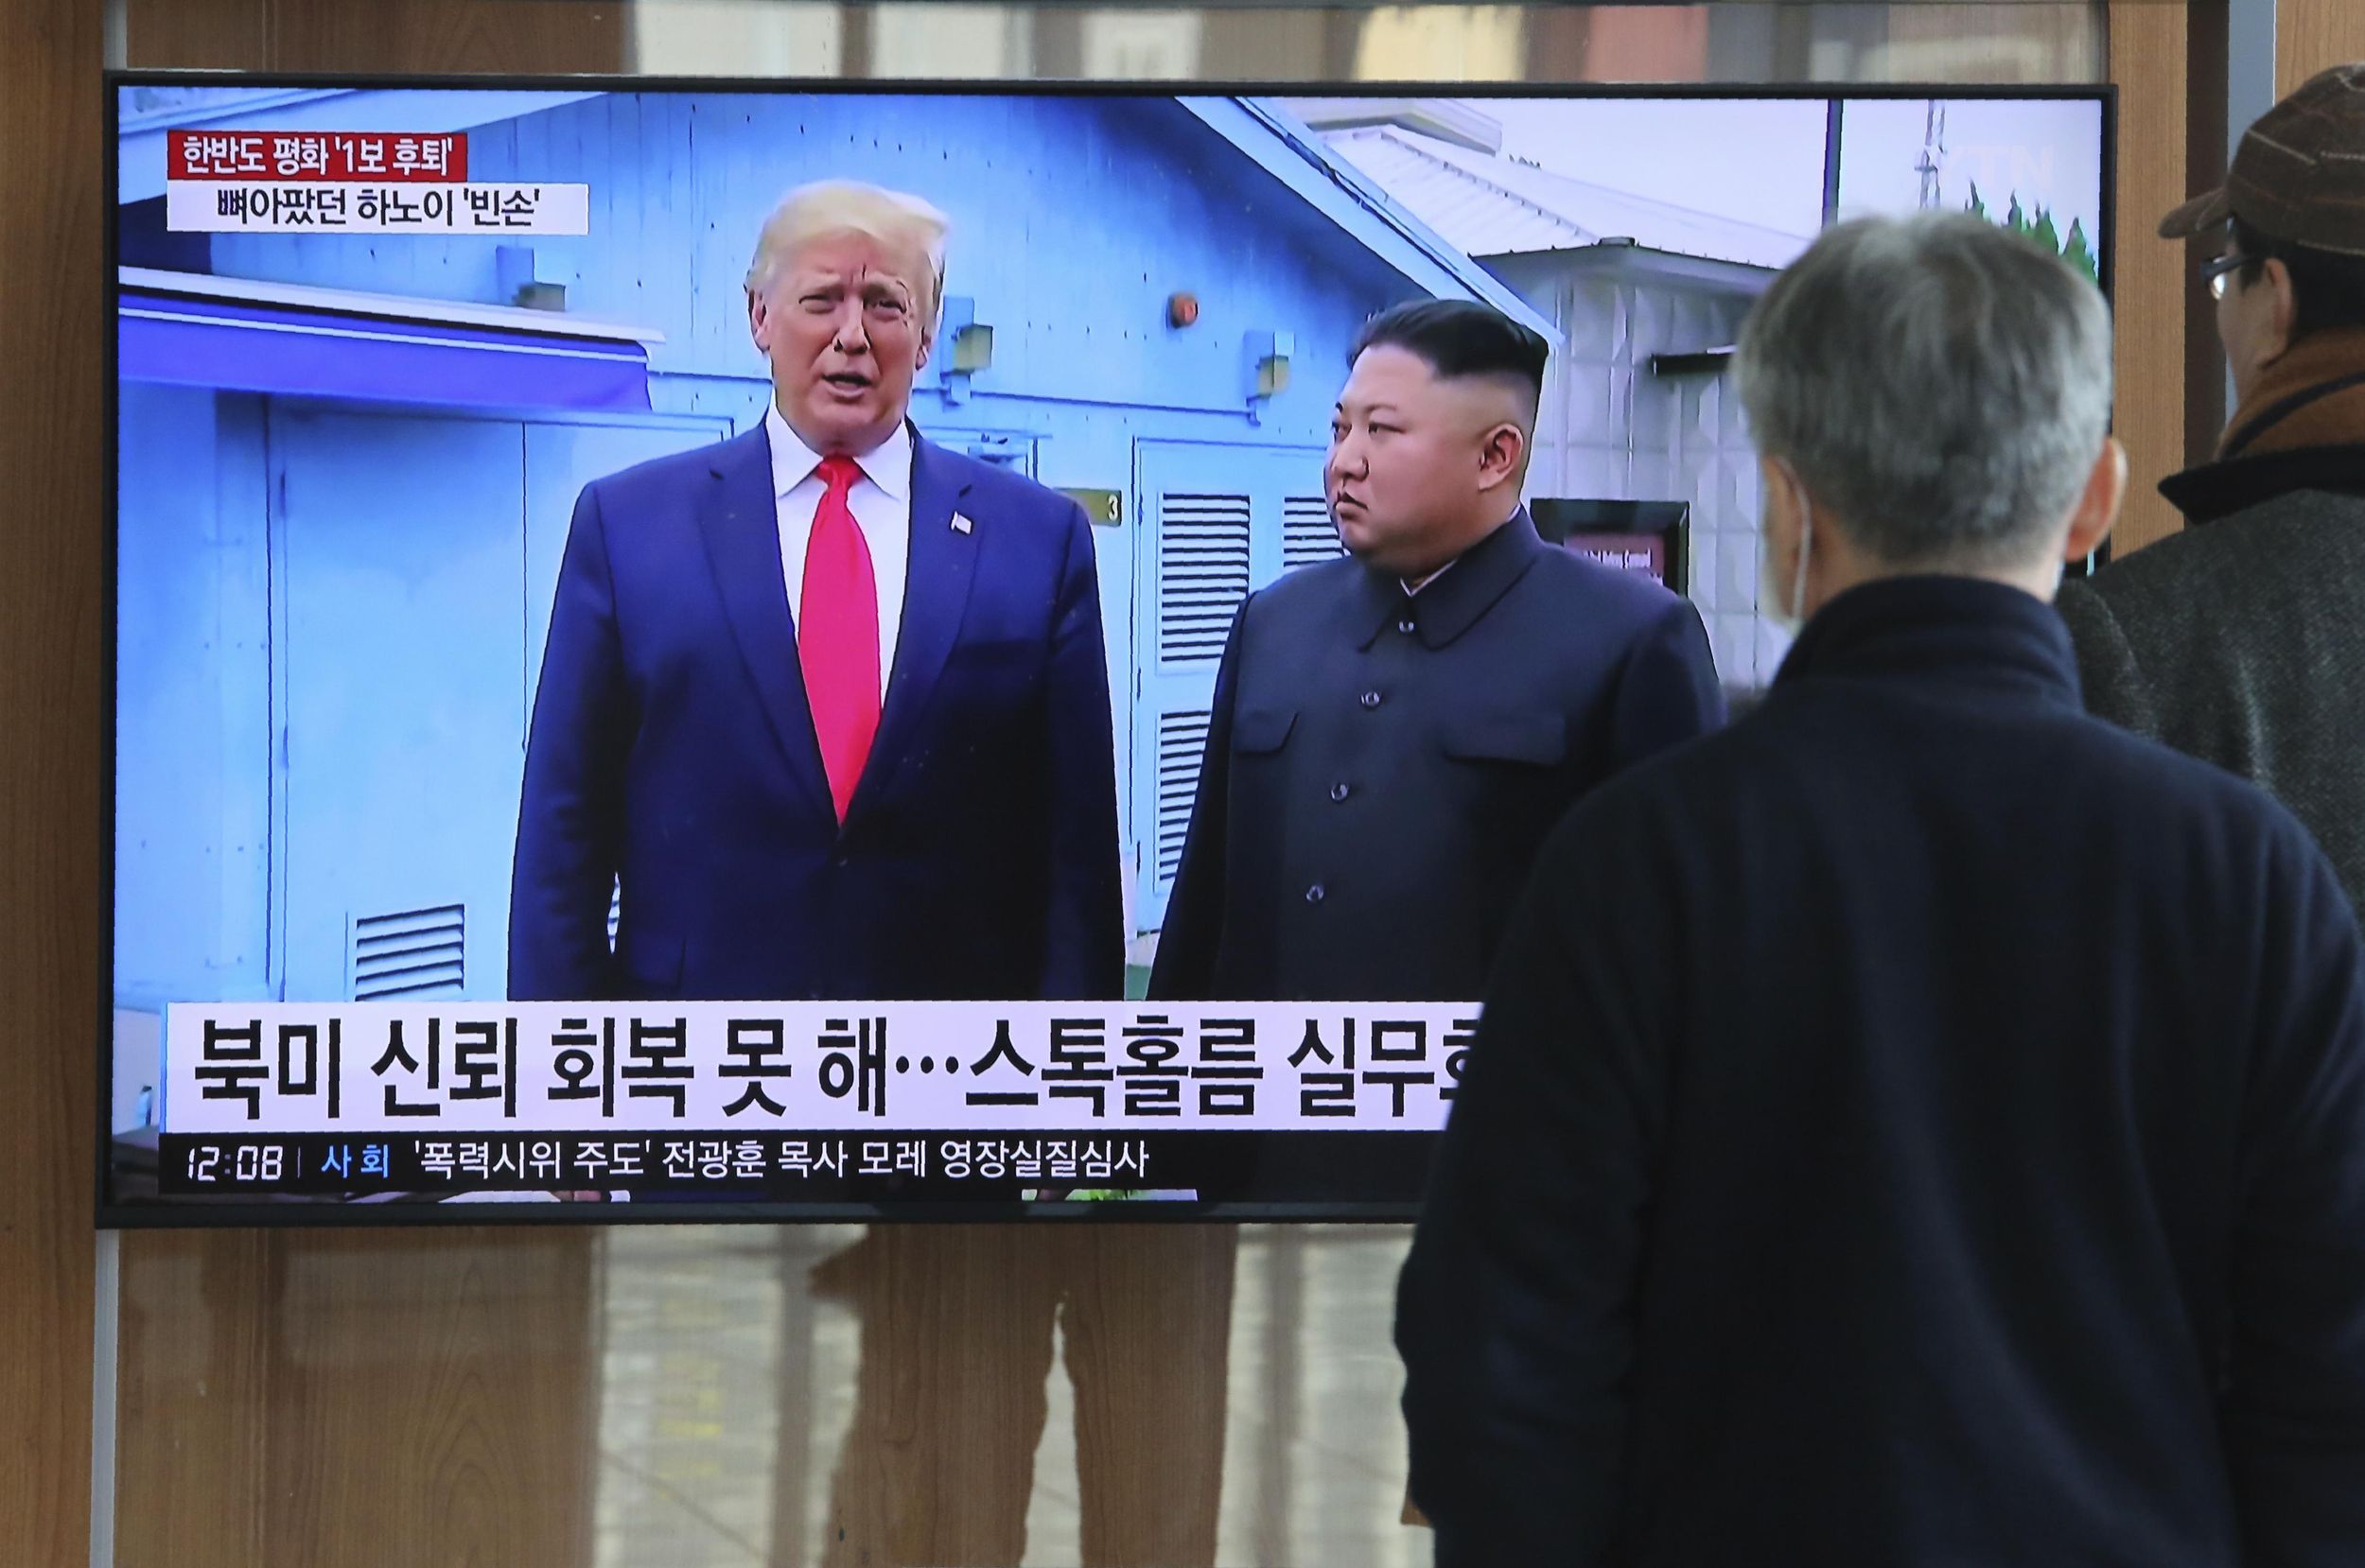 North Korea Leader Promises Look At New Weapon Soon The Spokesman Review 